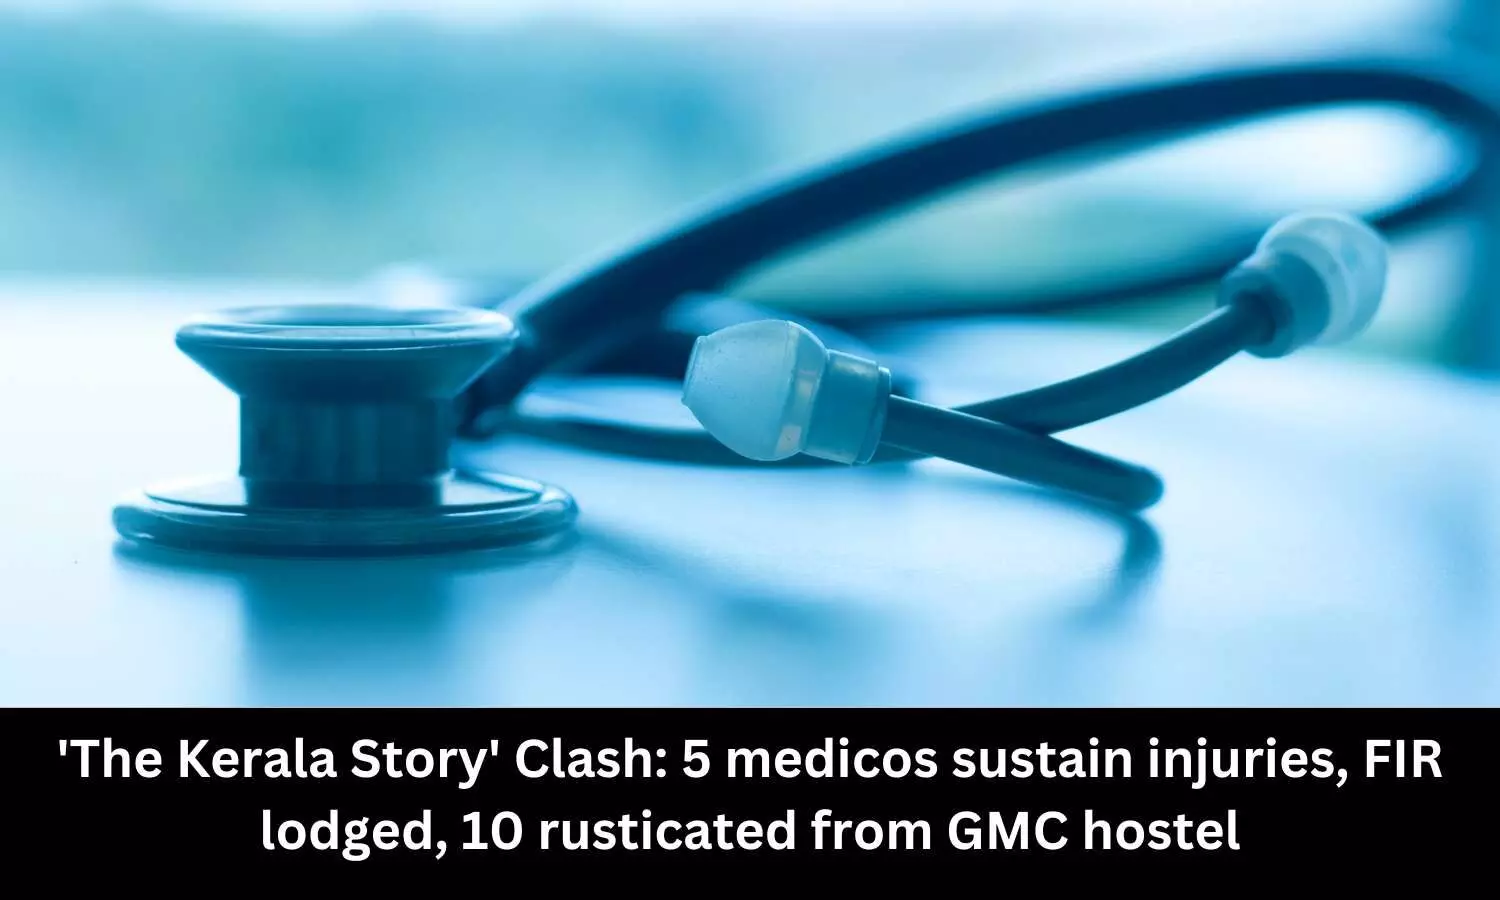 Scuffle over The Kerala Story: 5 medicos sustain injuries, FIR lodged, 10 rusticated from GMC hostel